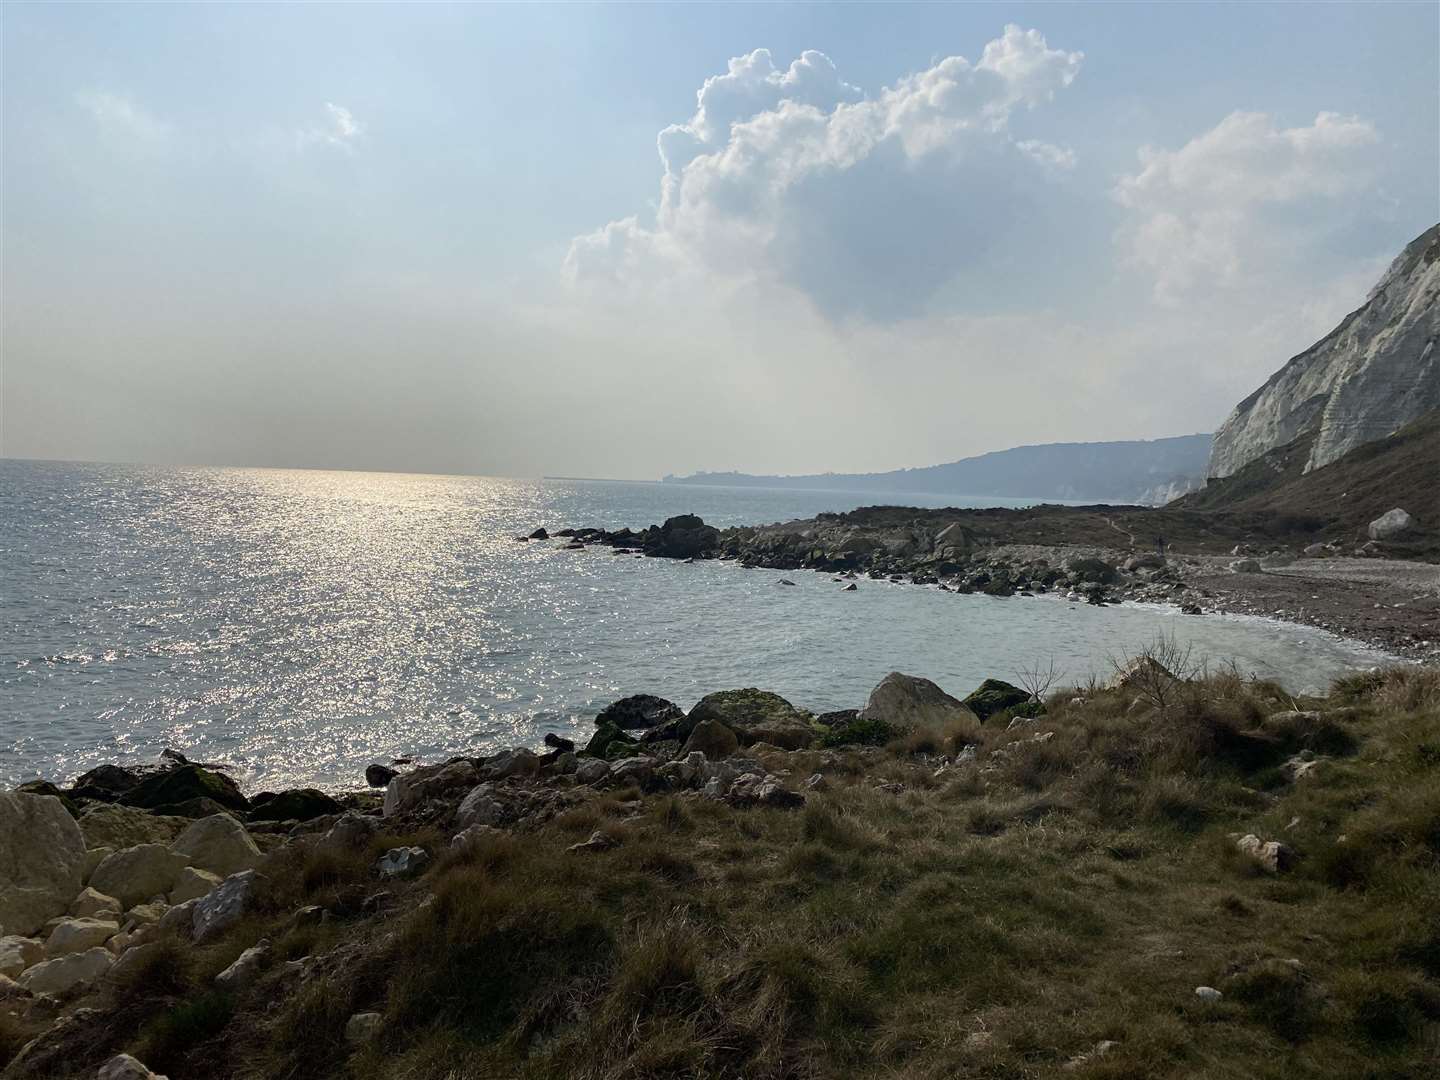 Samphire Hoe has views of the English Channel and White Cliffs, as well as an abundance of wildlife. Picture: KM reporter